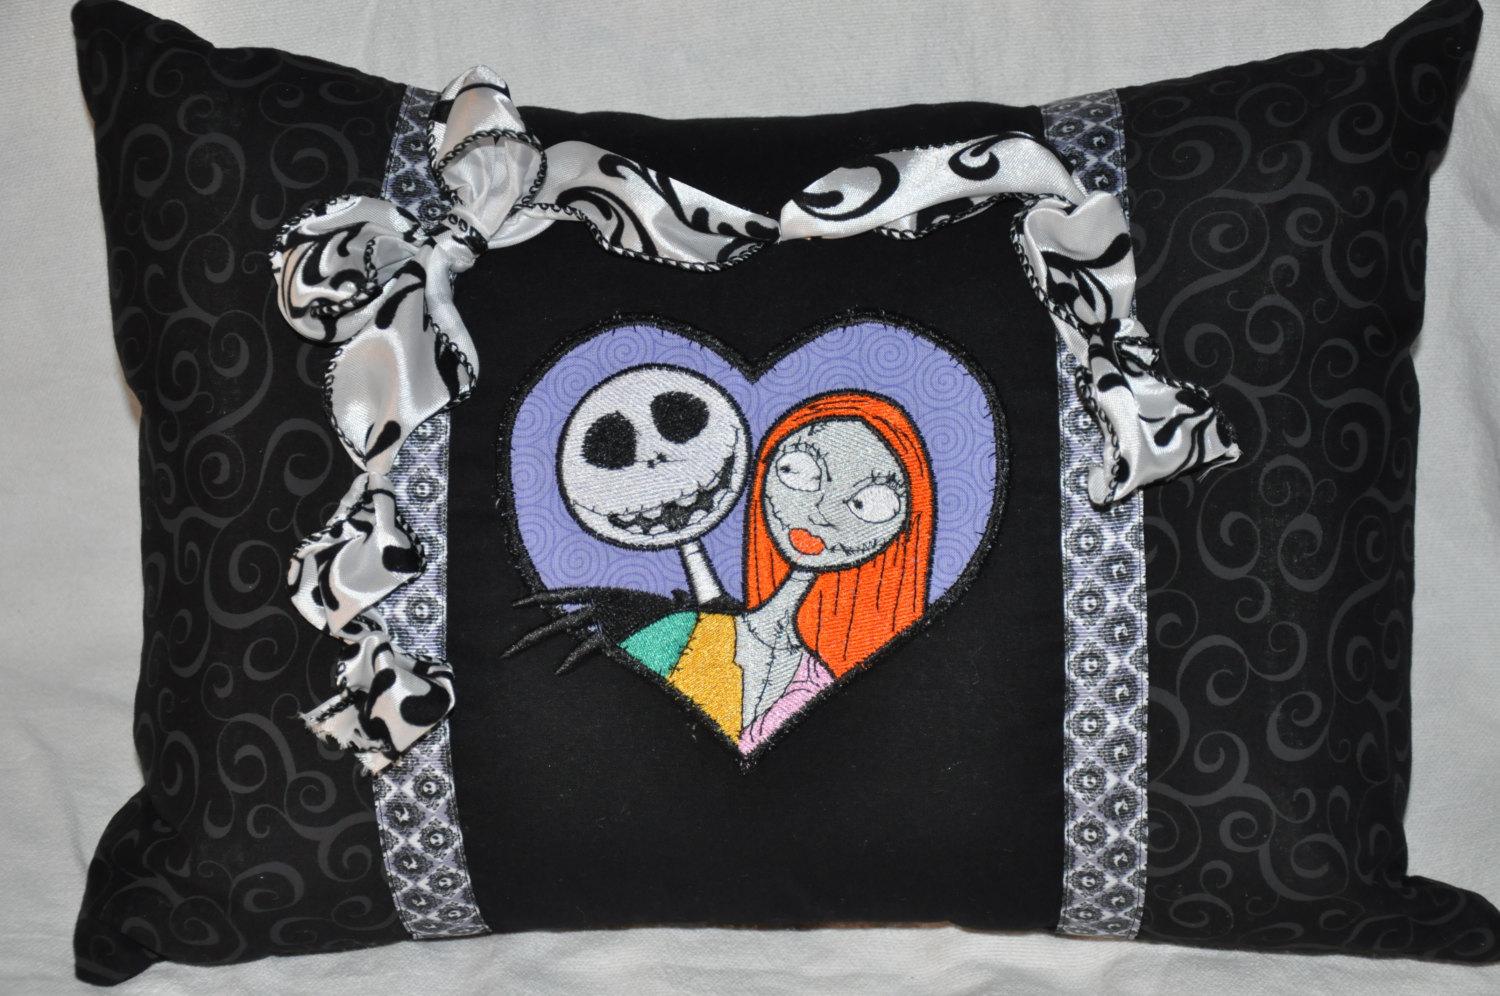 Jack and Sally embroidered pillow with a bow